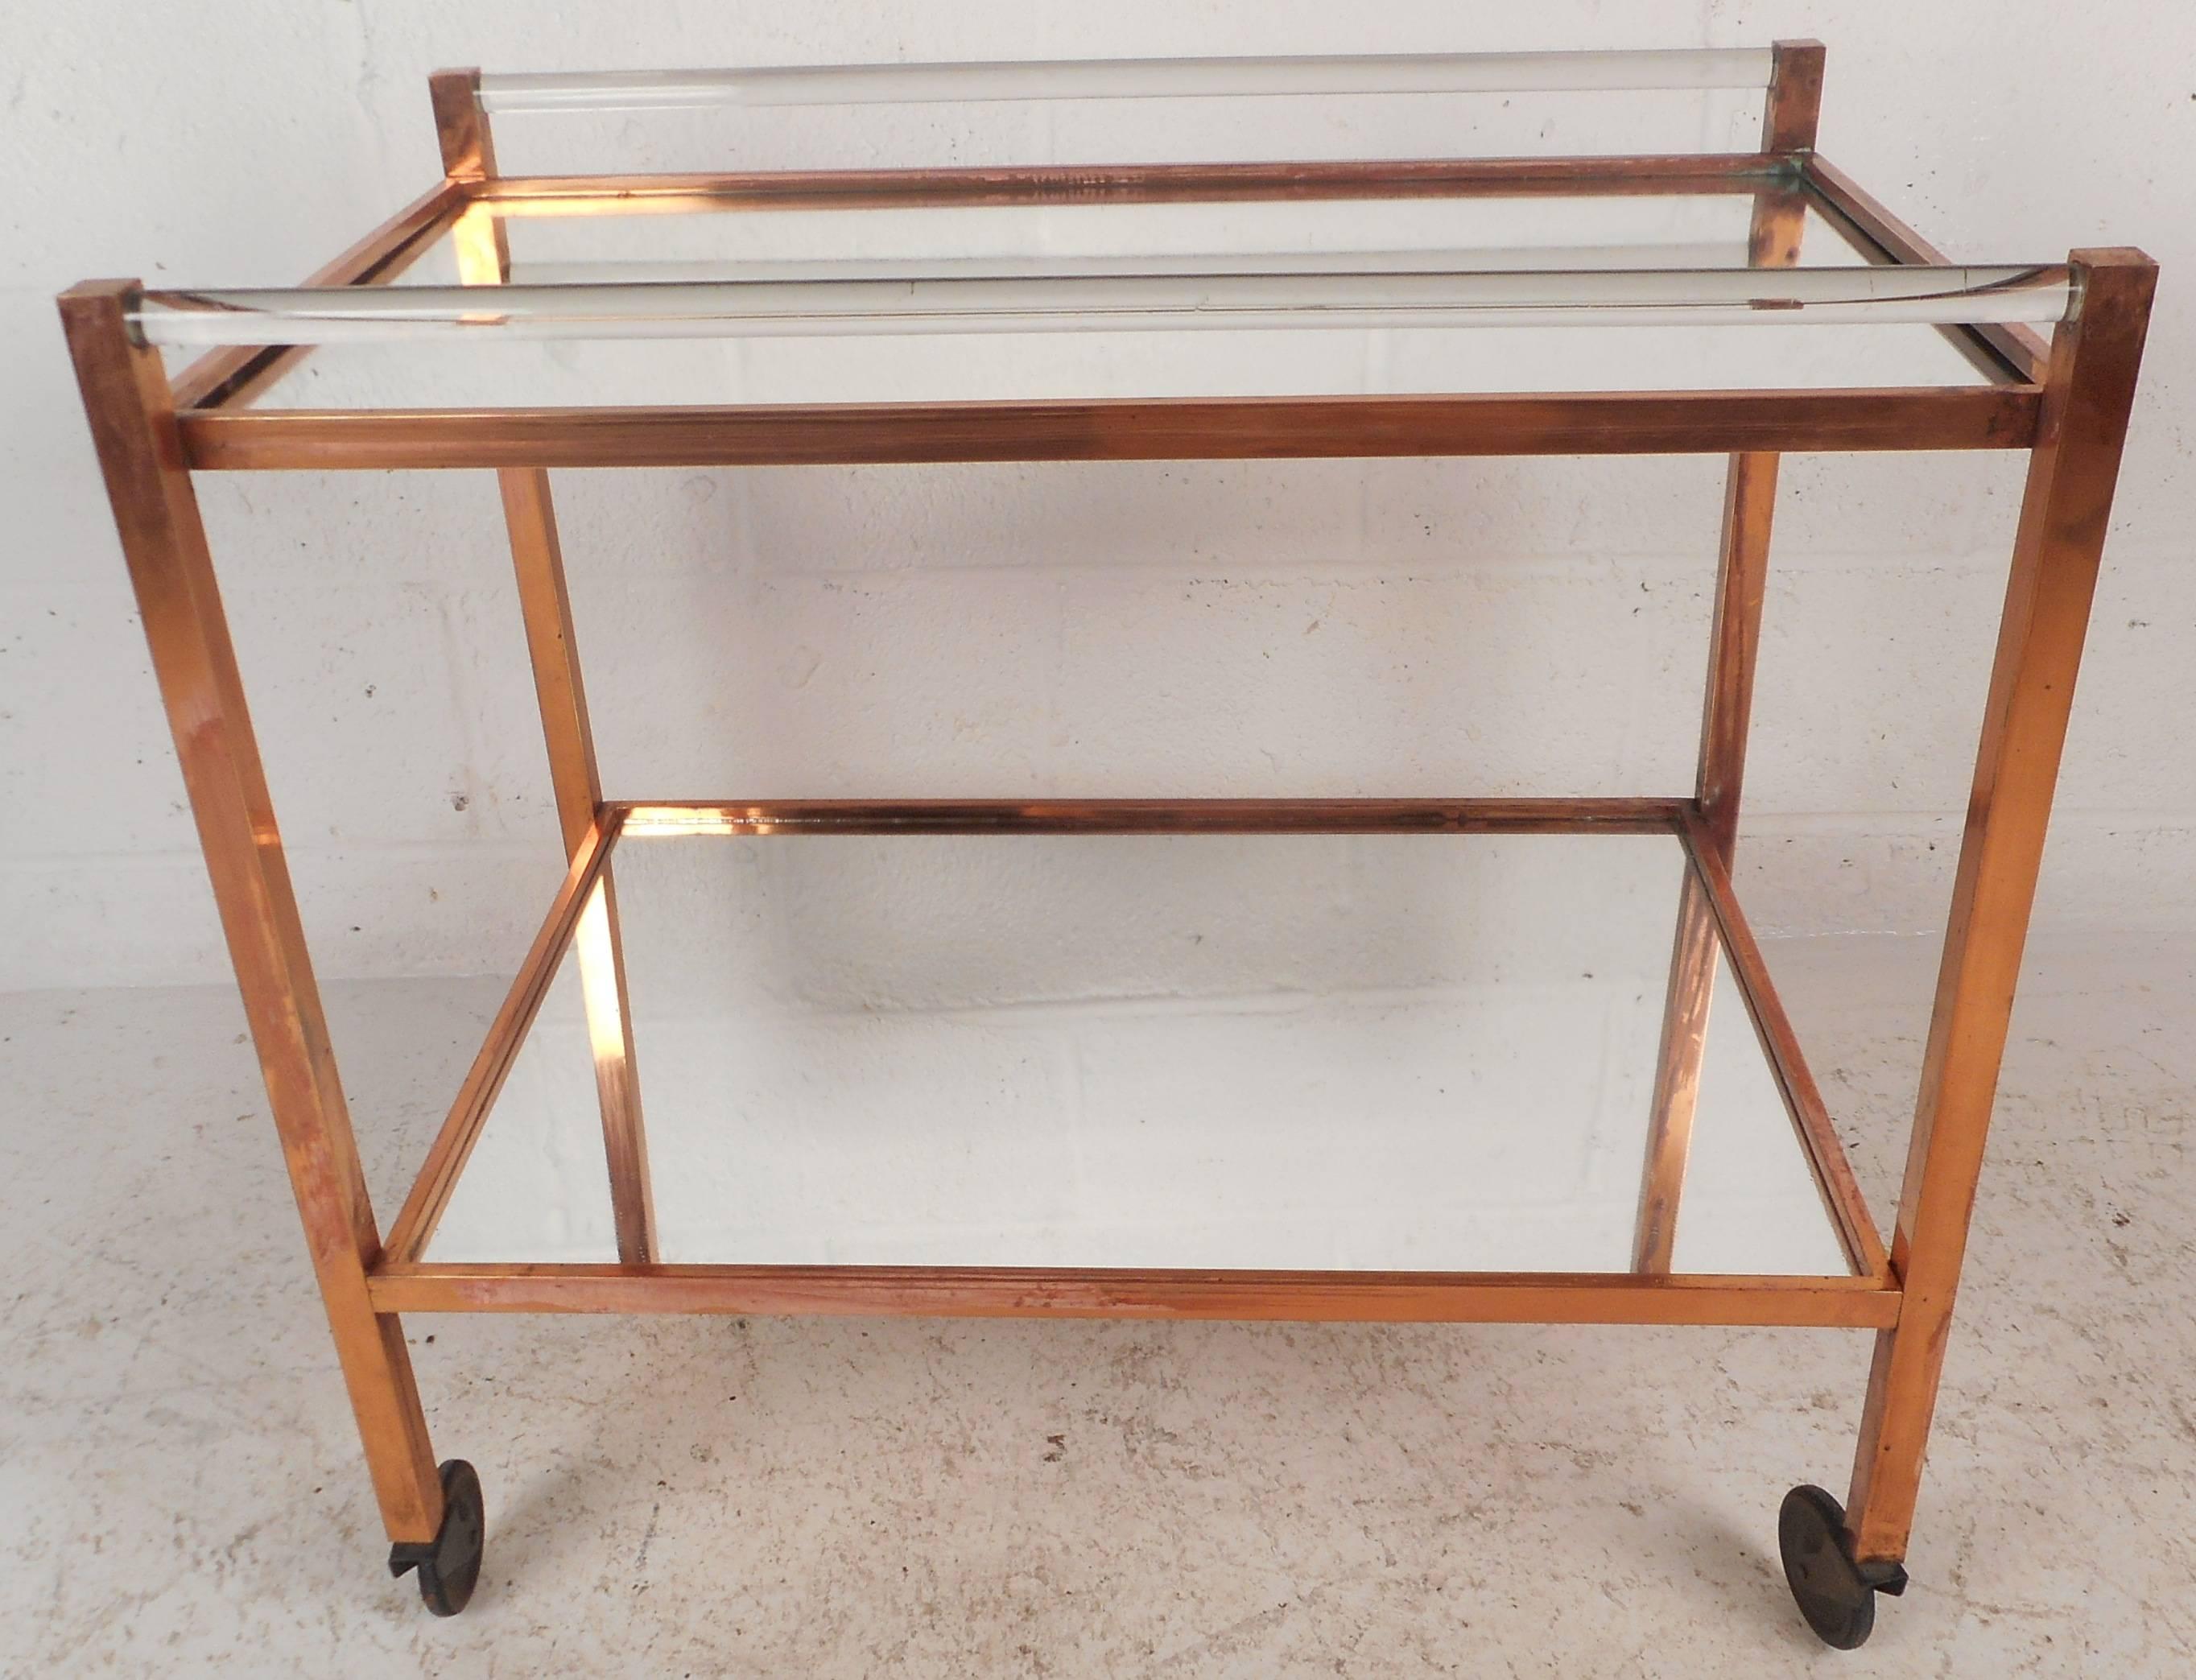 This stunning vintage modern bar cart features a rare combination of copper and Lucite. The stylish design has two mirrored tiers adding to the allure. This unusual piece shows quality construction. This elegant mid-century piece is sure to